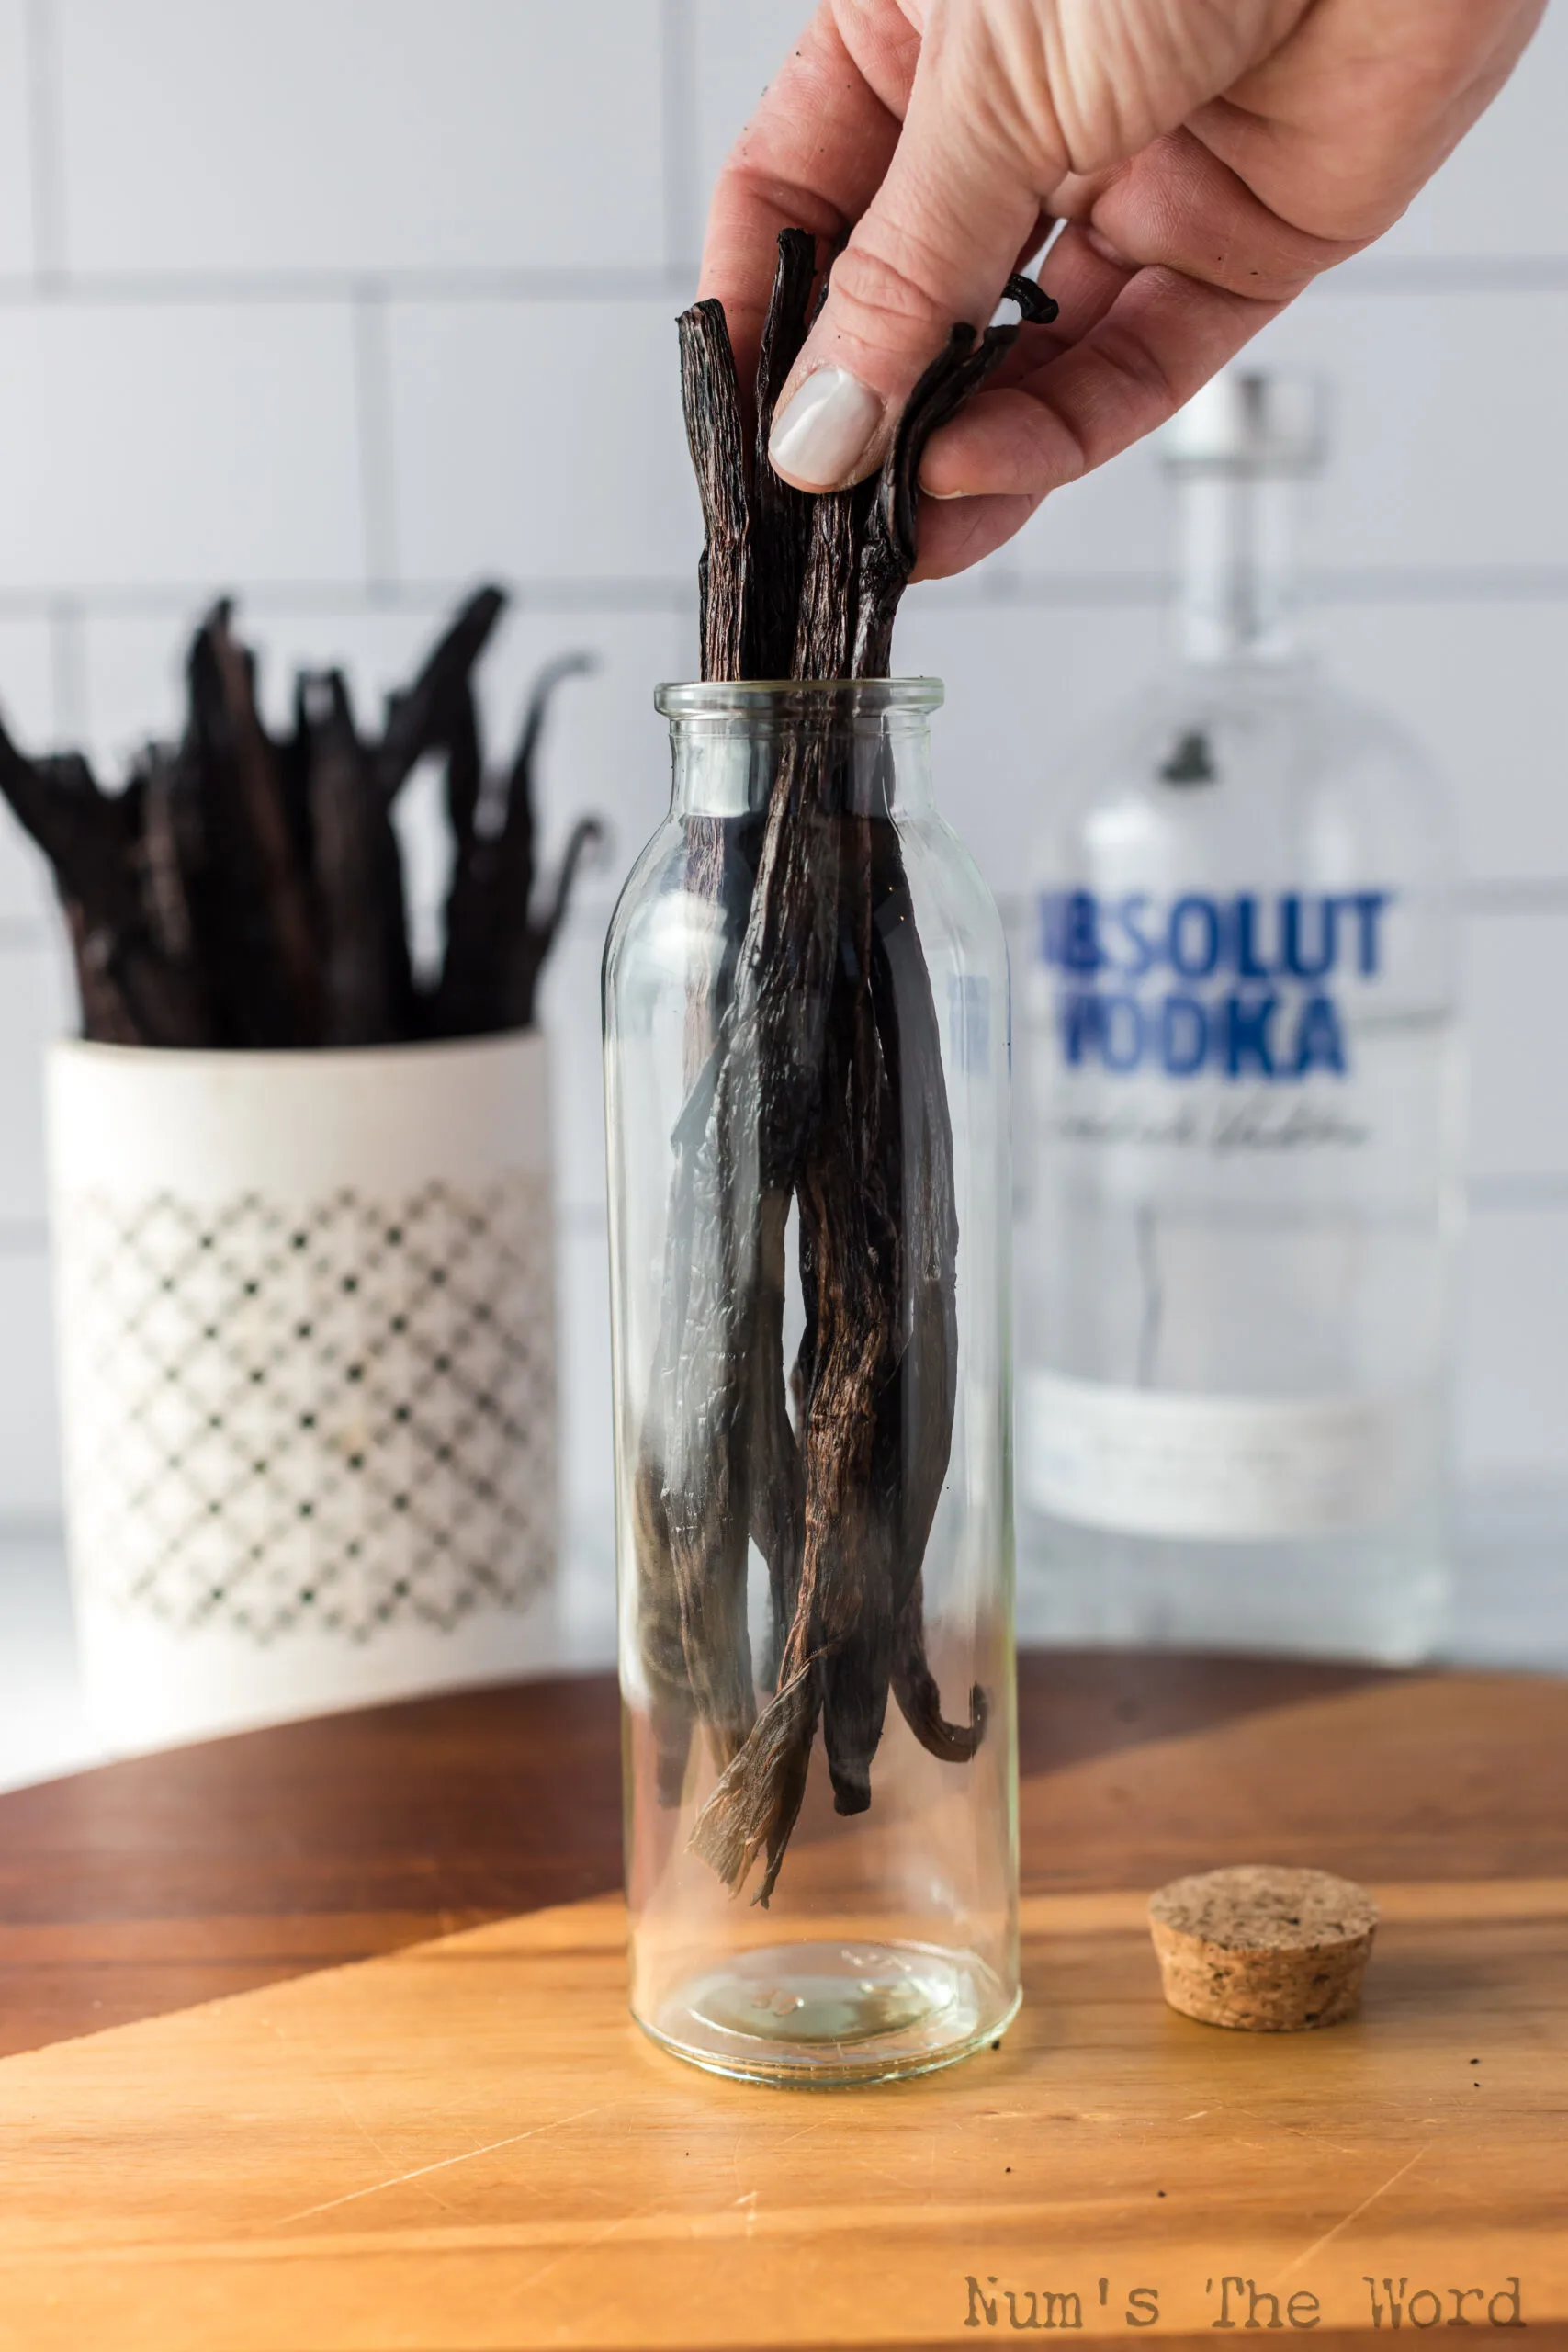 Hand placing the vanilla beans into a jar to brew into vanilla extract